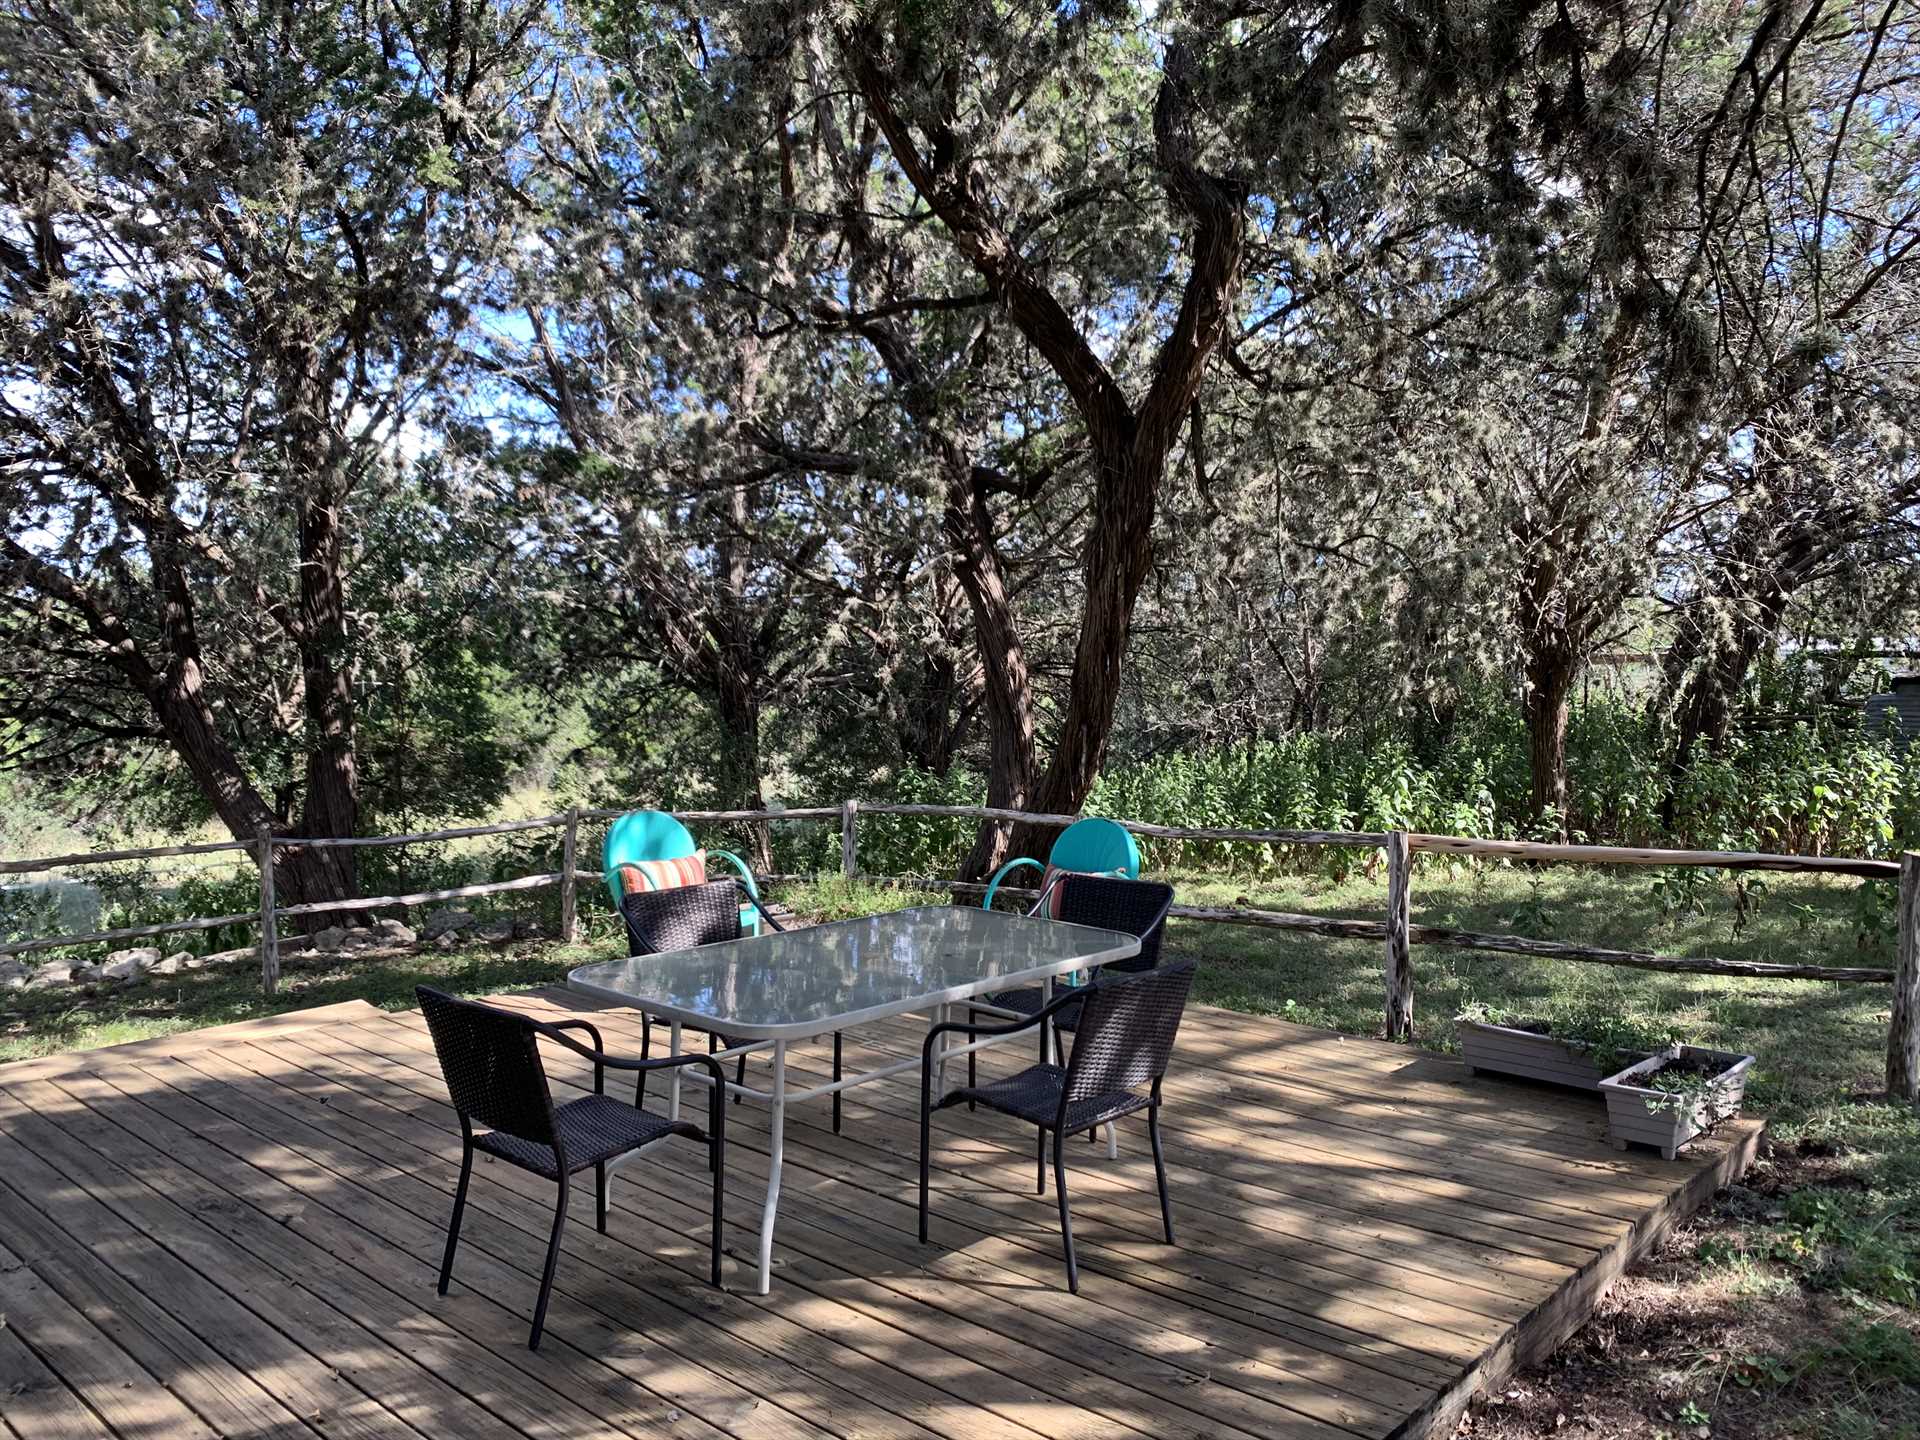                                                 The shaded deck is a paradise for both nature lovers and amateur astronomers!